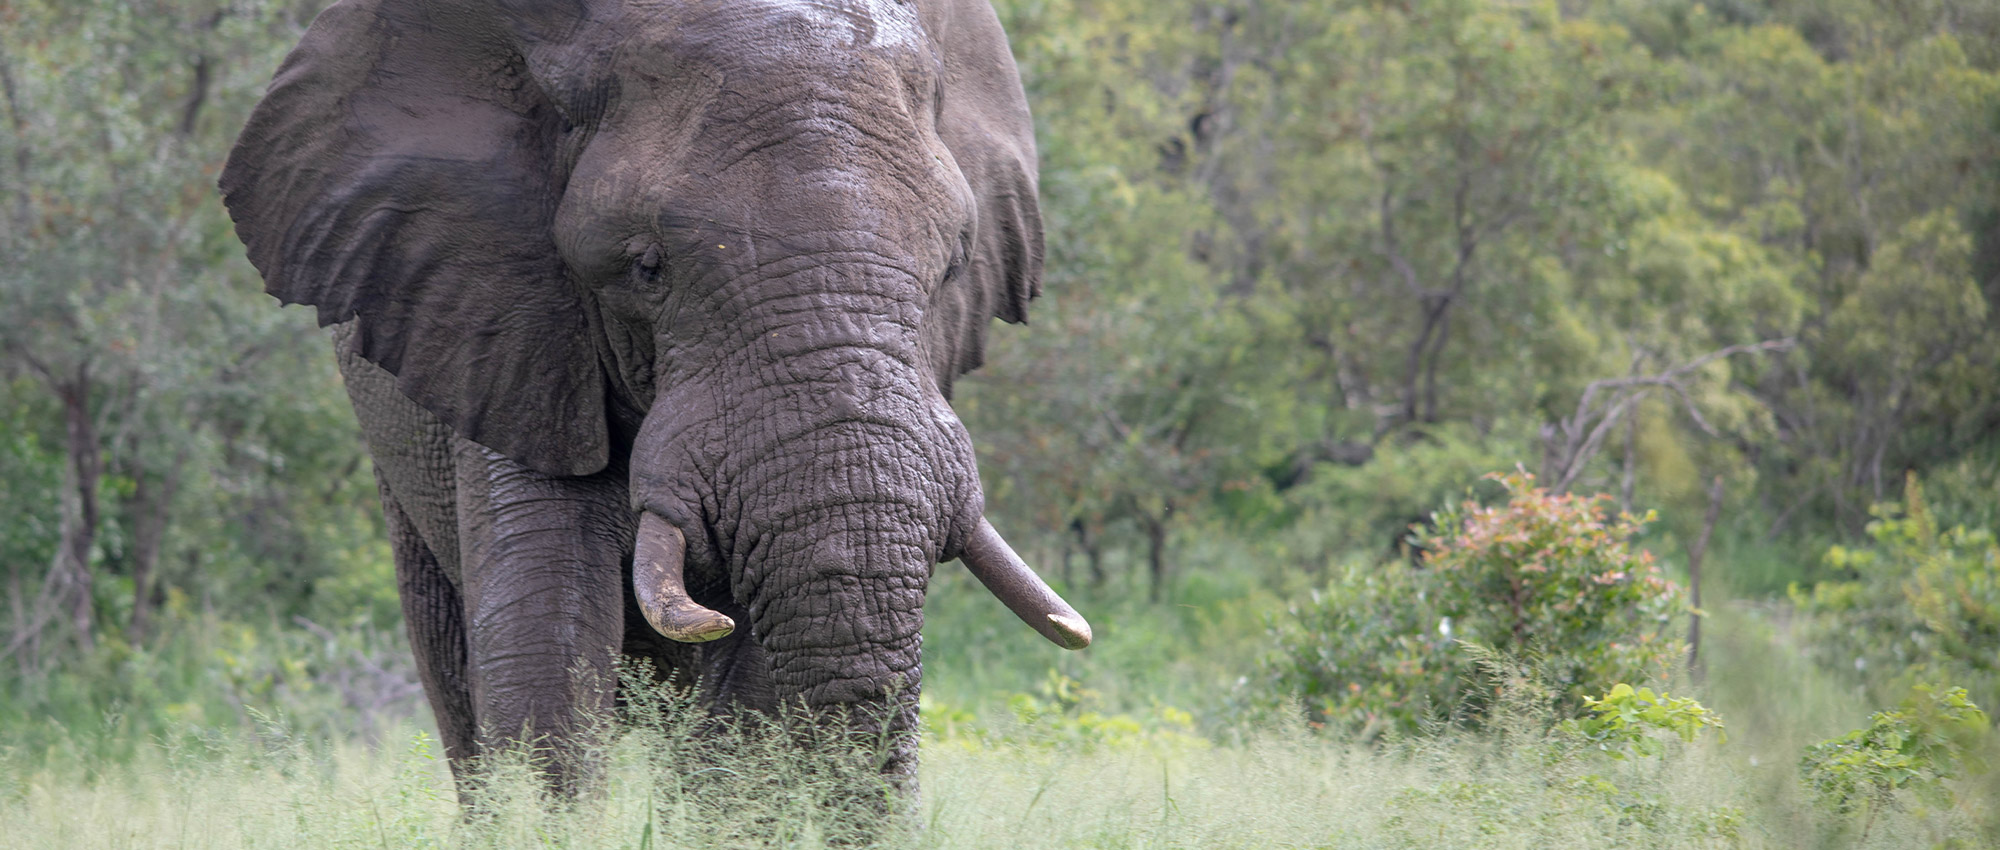 Elephant Whispers: A conservation effort unlike any other